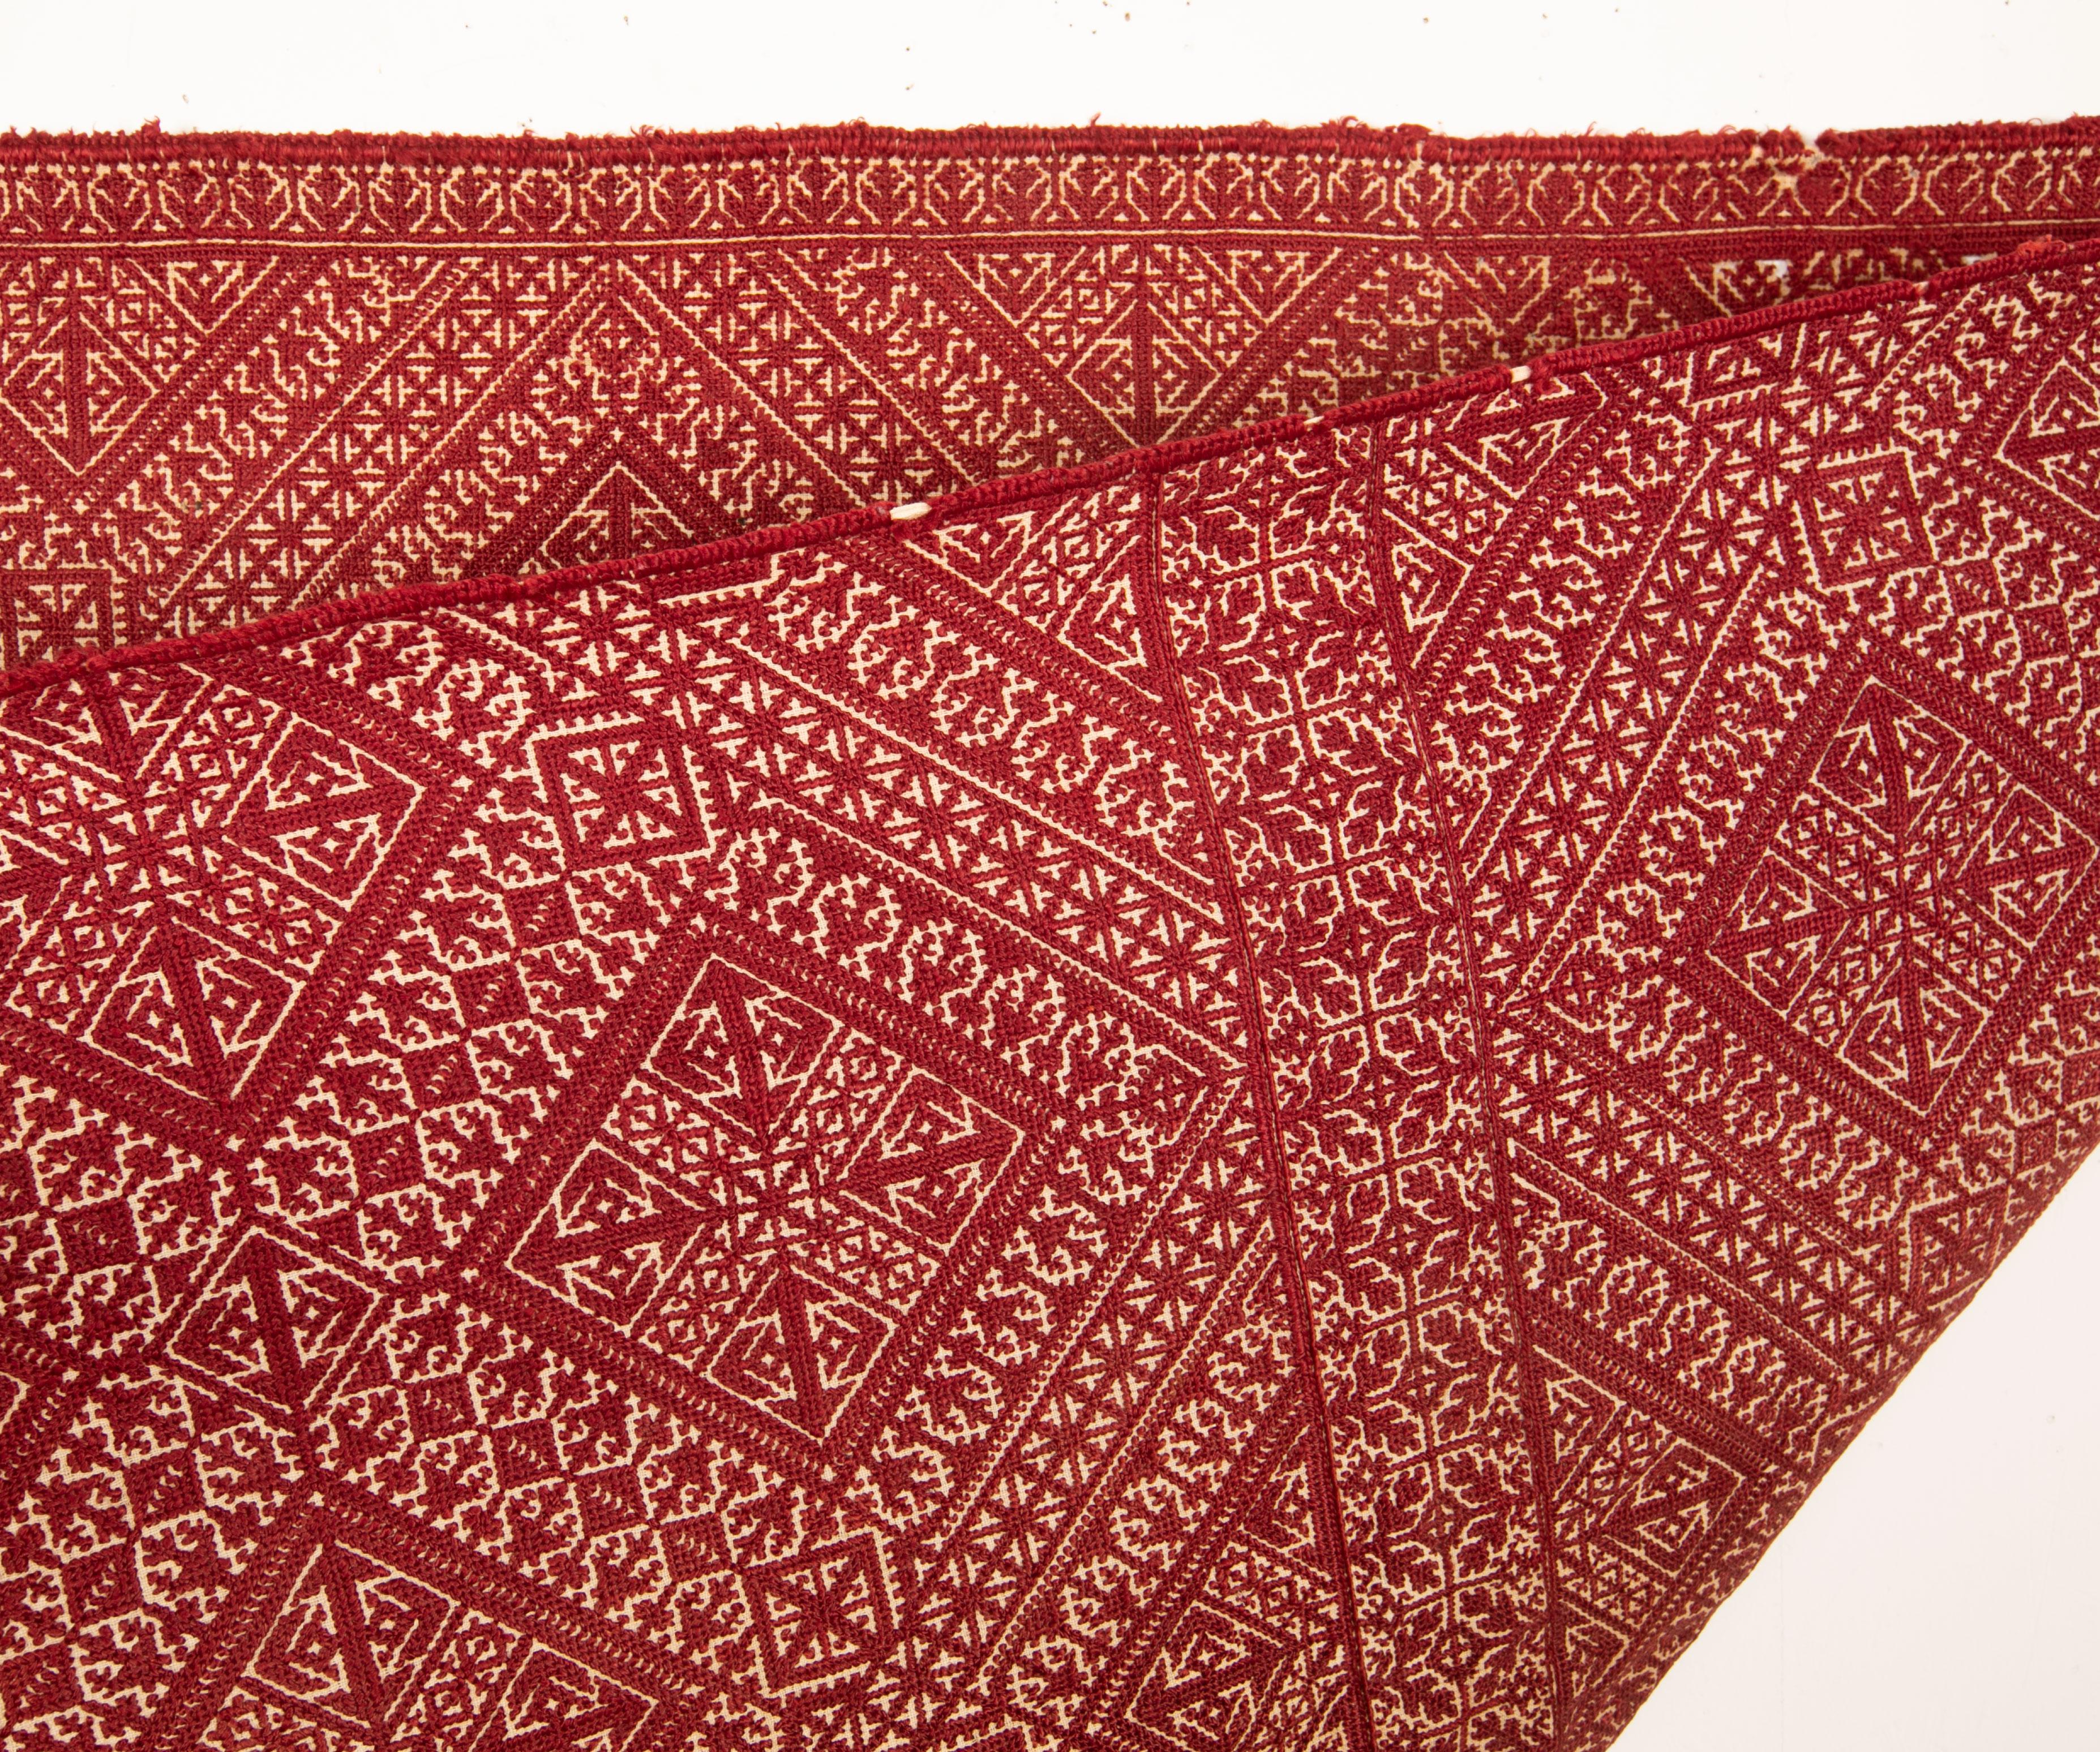 Silk Antique Fez Embroidery from Morocco, 1900s